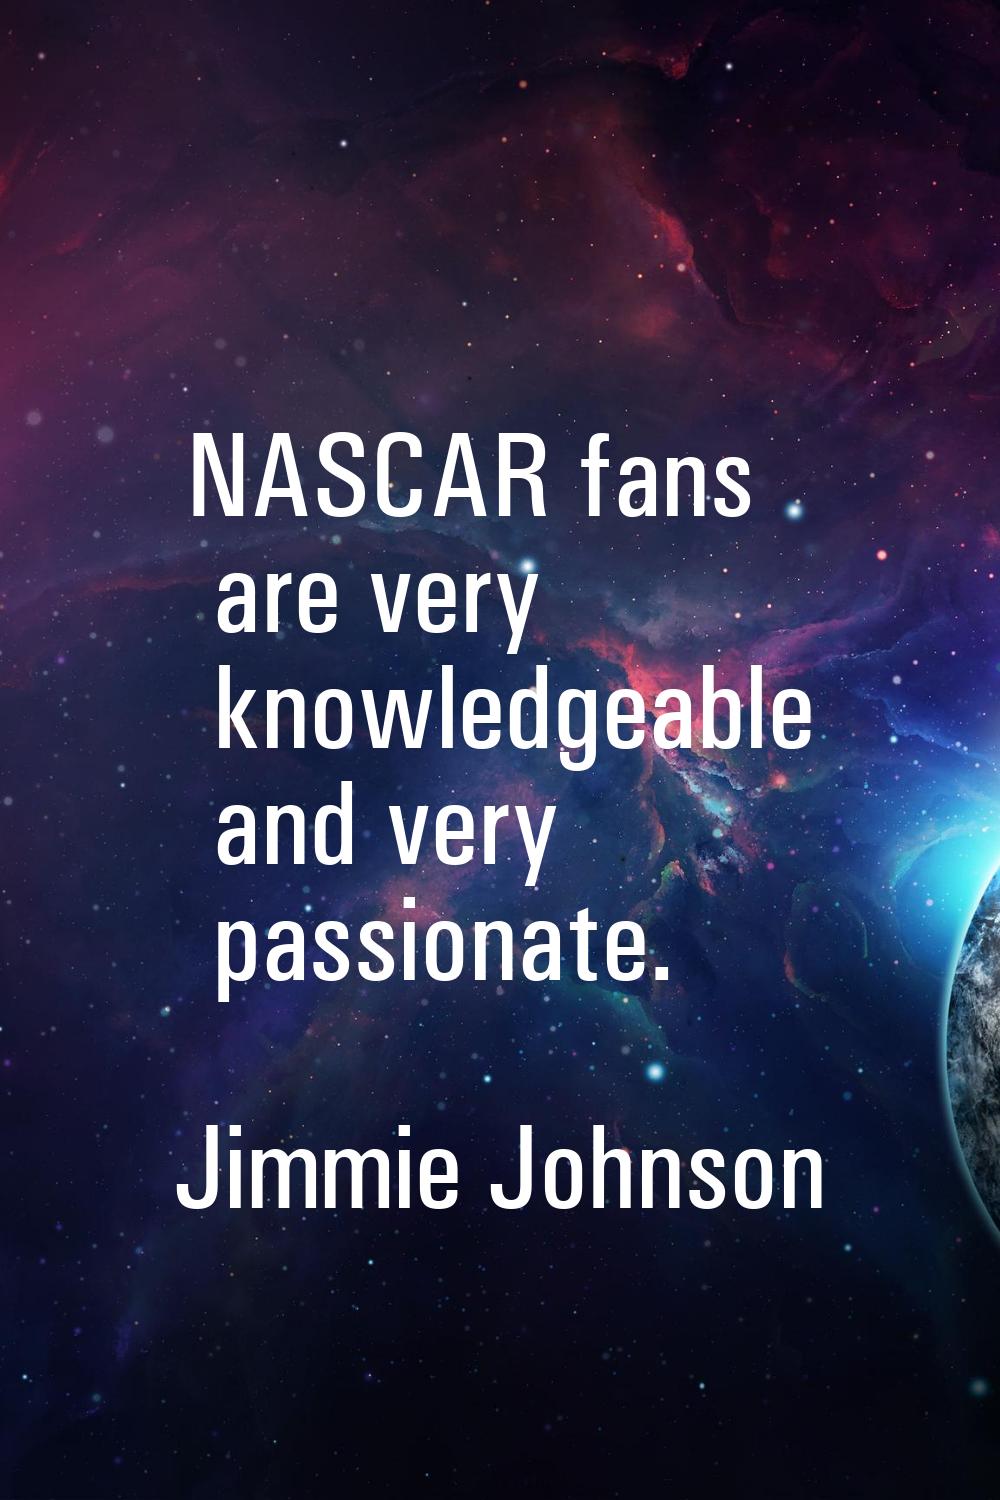 NASCAR fans are very knowledgeable and very passionate.